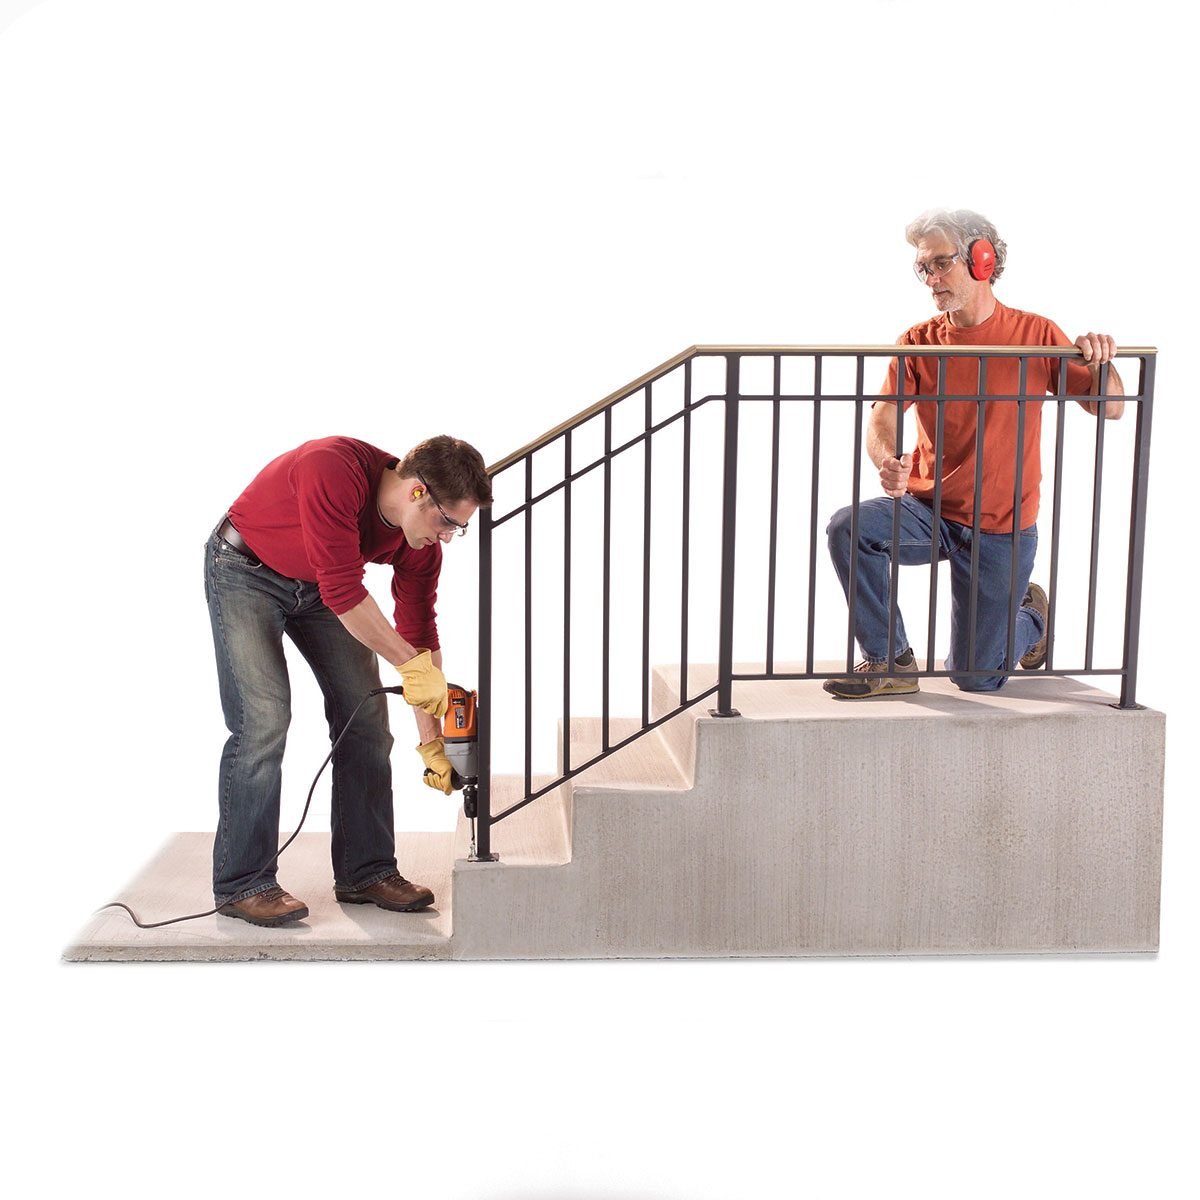 Two men installing a sturdy handrail | Construction Pro Tips